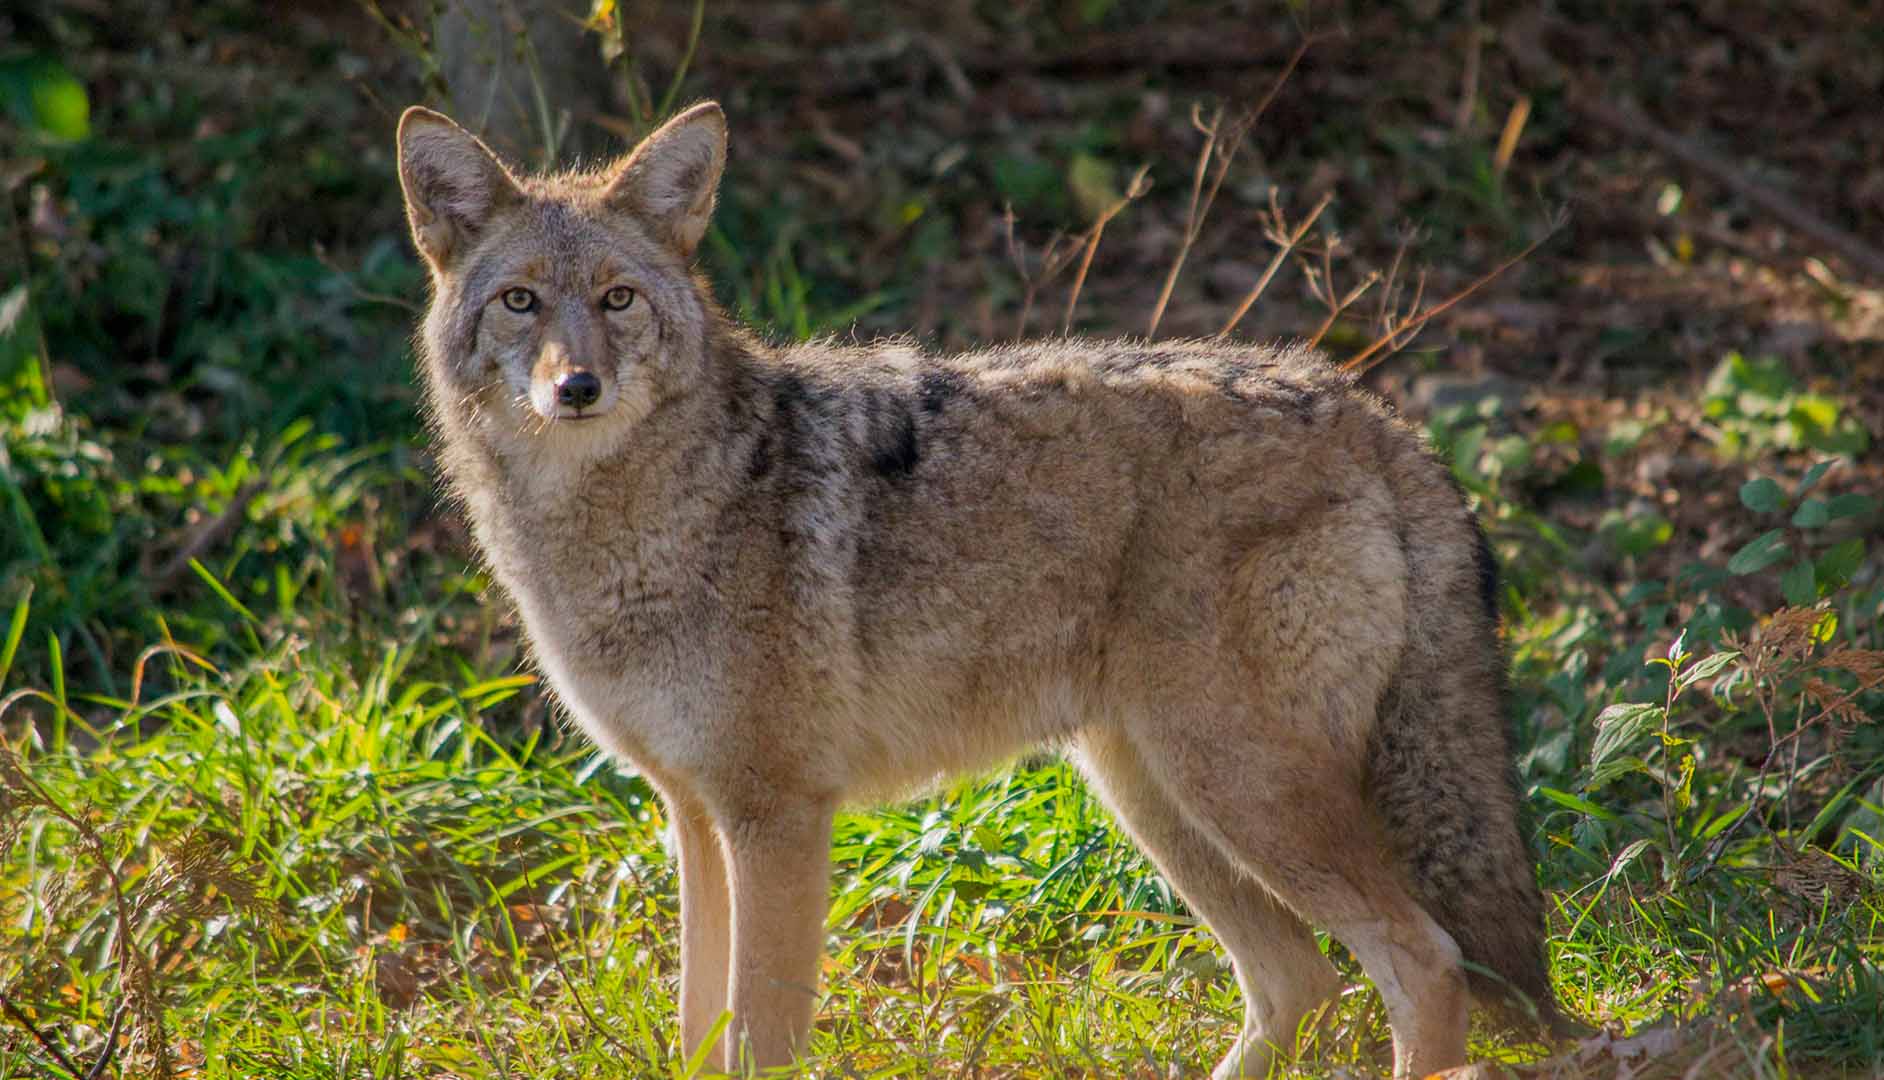 Coyote - appearance